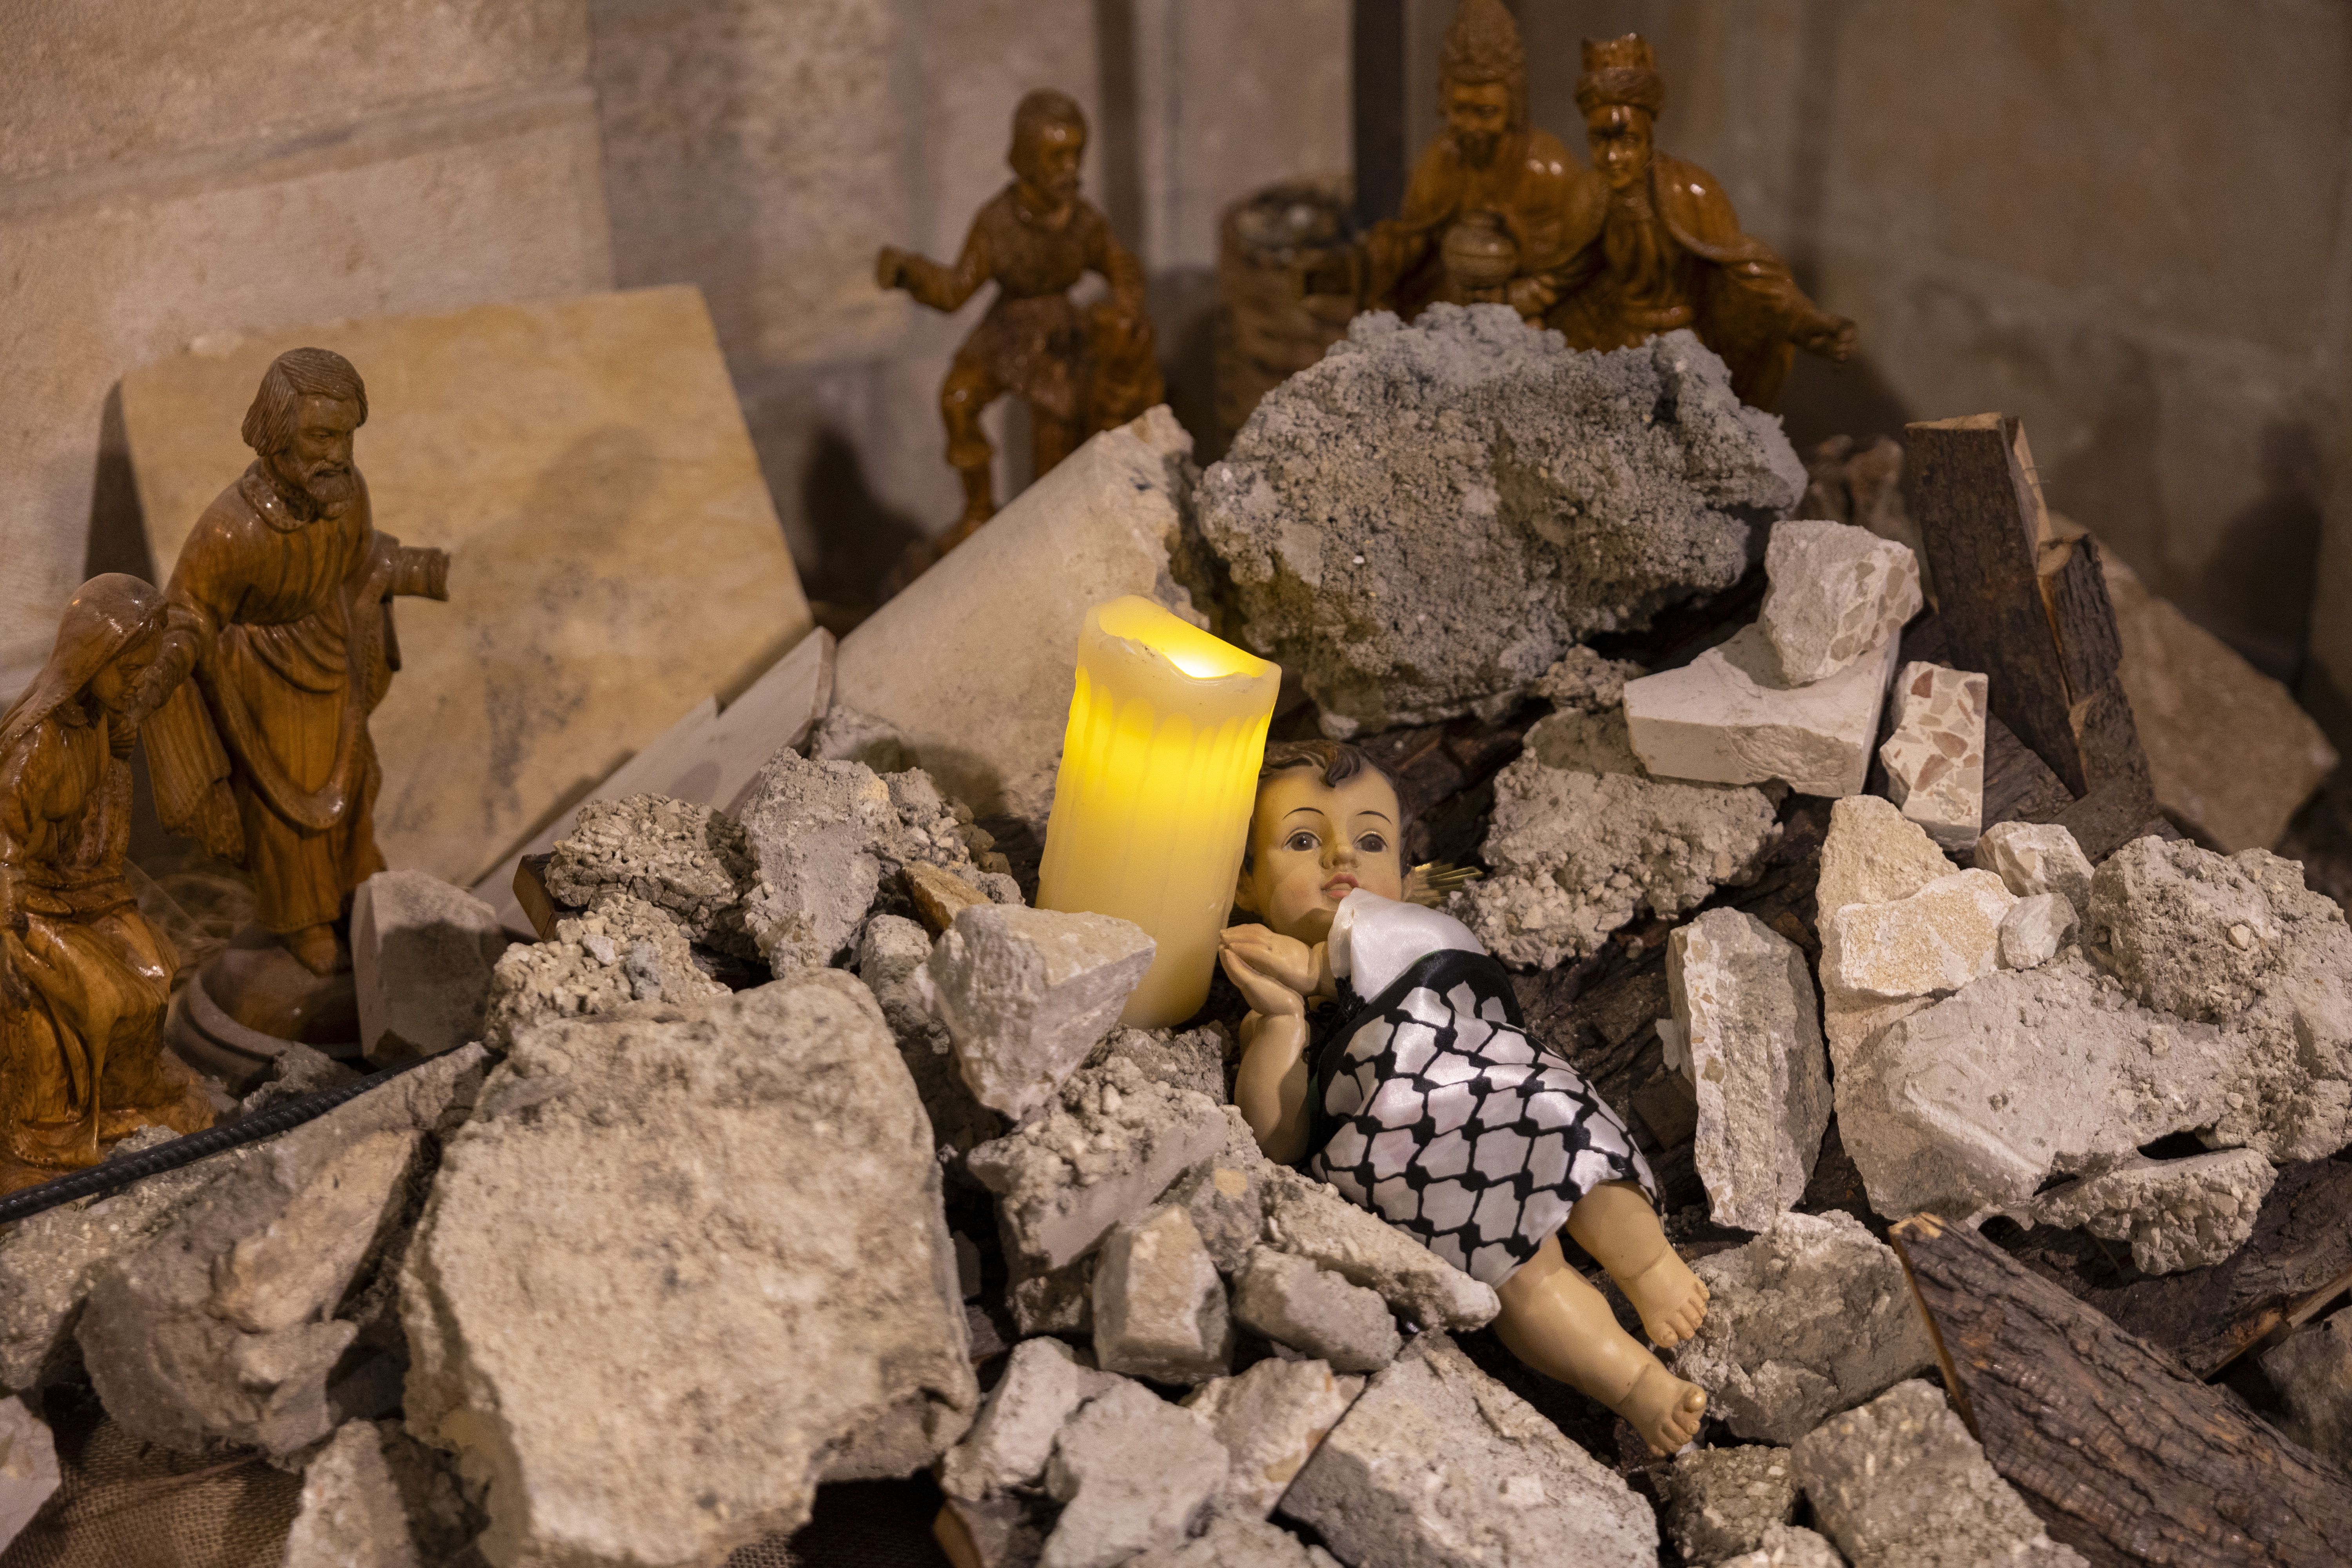 A plastic baby doll wrapped in a keffiyah scarf placed among rubble next to an electric candle. 